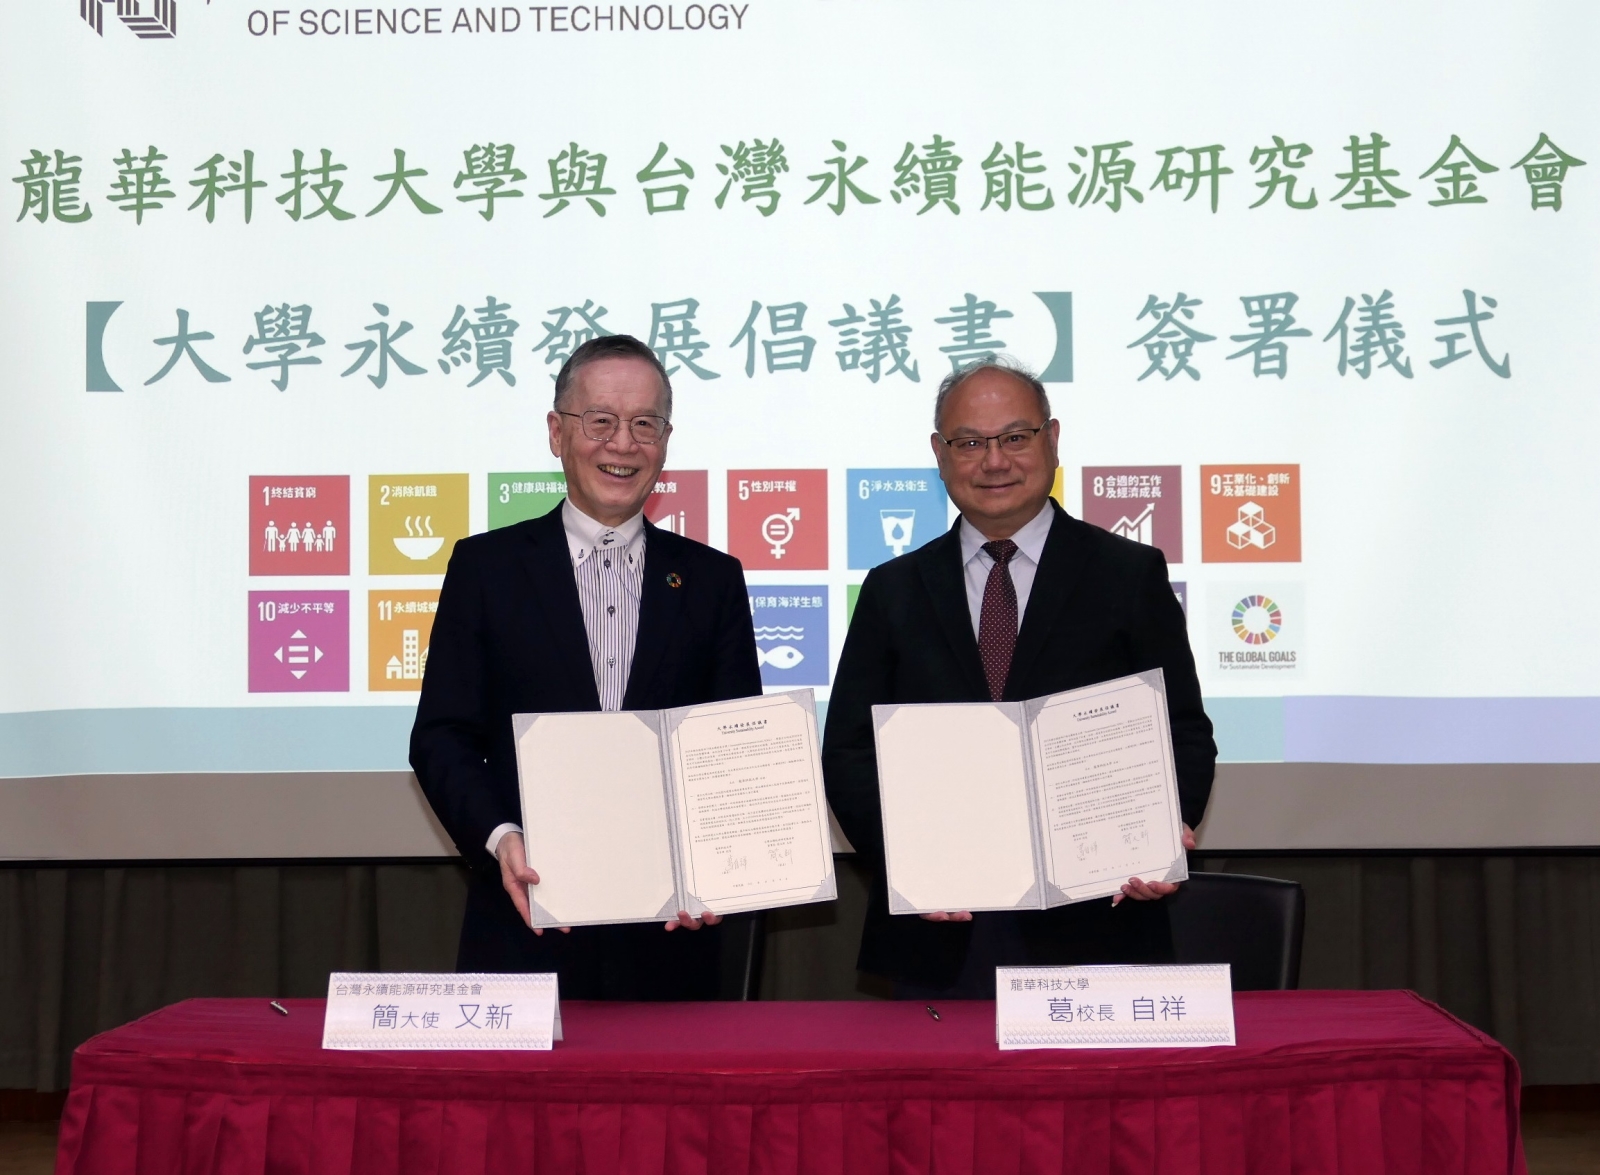 An initiative was signed by Lunghwa University and Taiwan Institute for Sustainable Energy to promote sustainable development together.